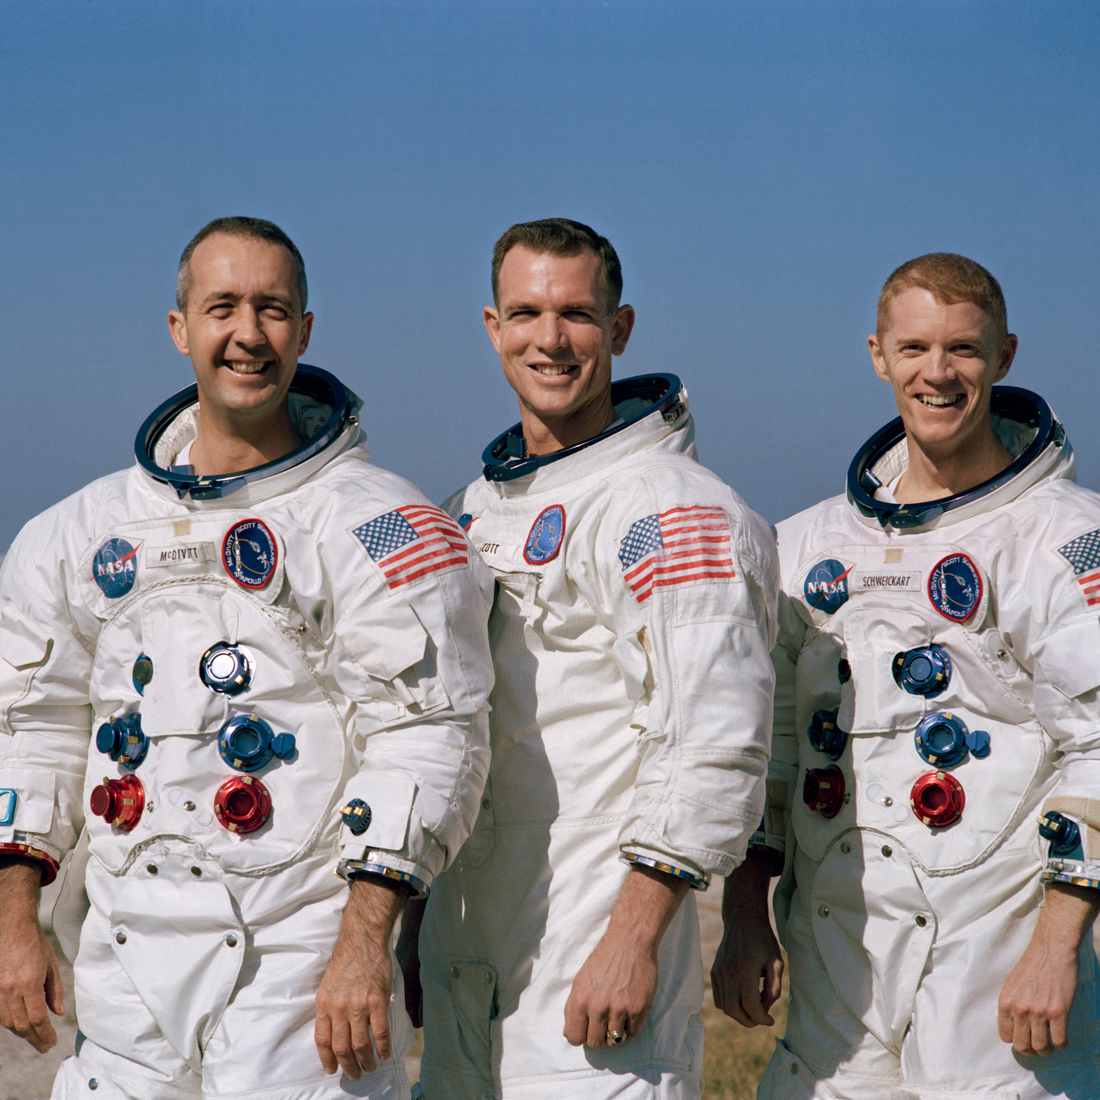 Apollo 9 Crew posing in their space suits.